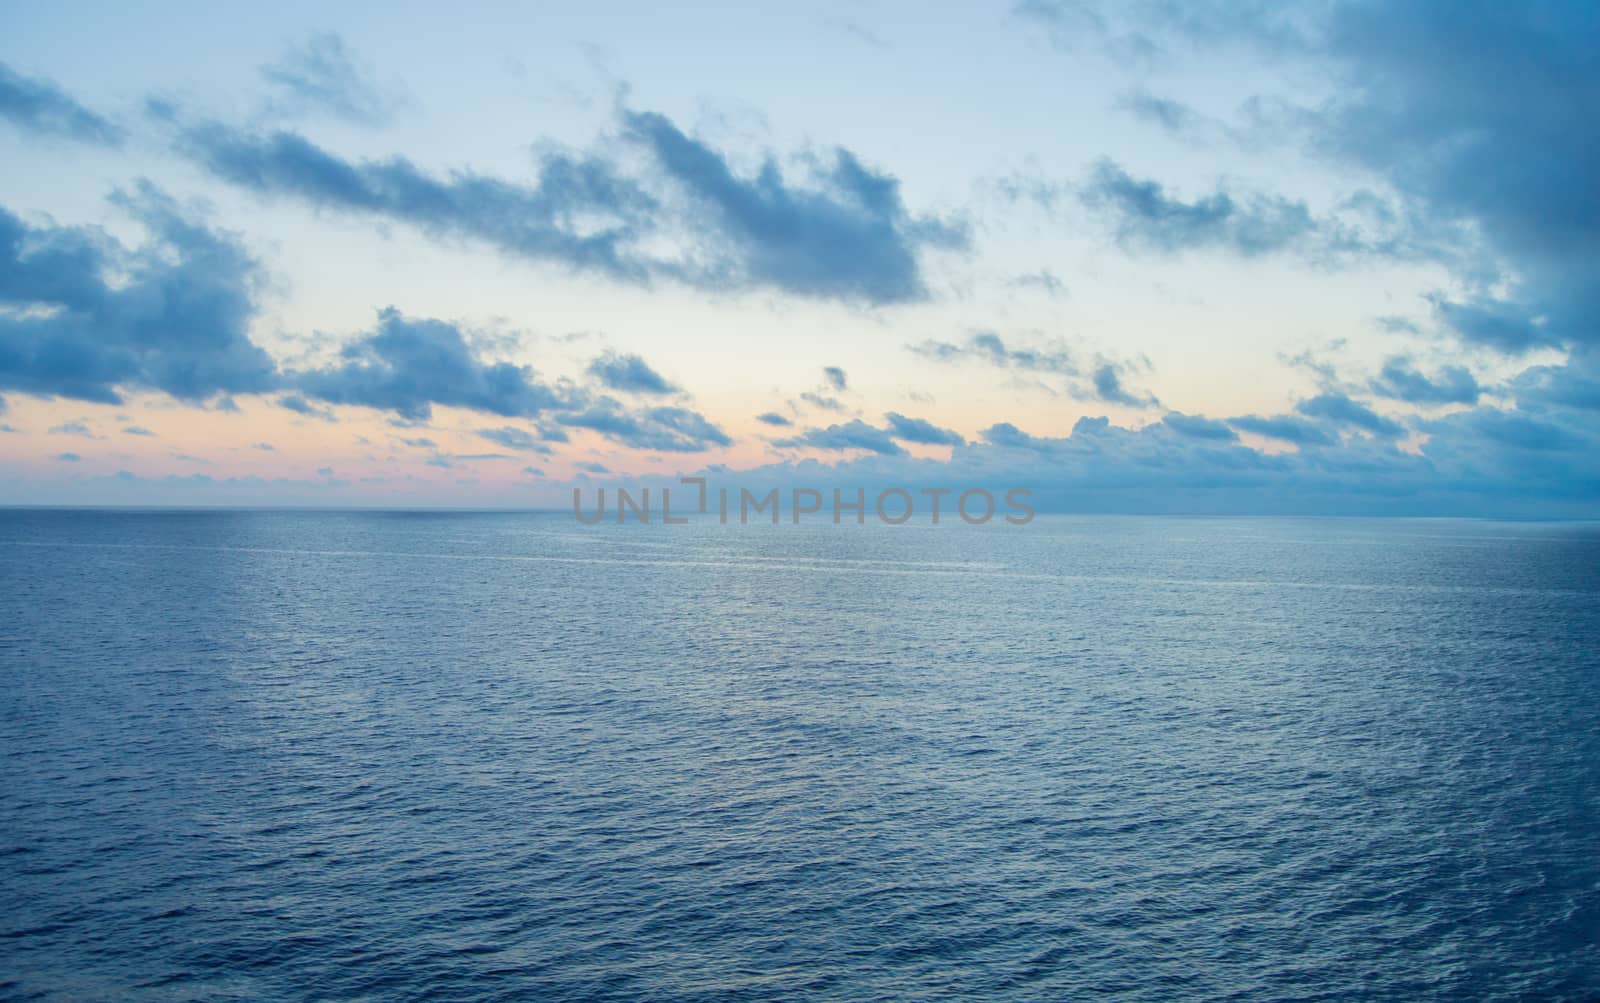 Beautiful sunset and silver path on the sea, blue clouds in the sky, background.